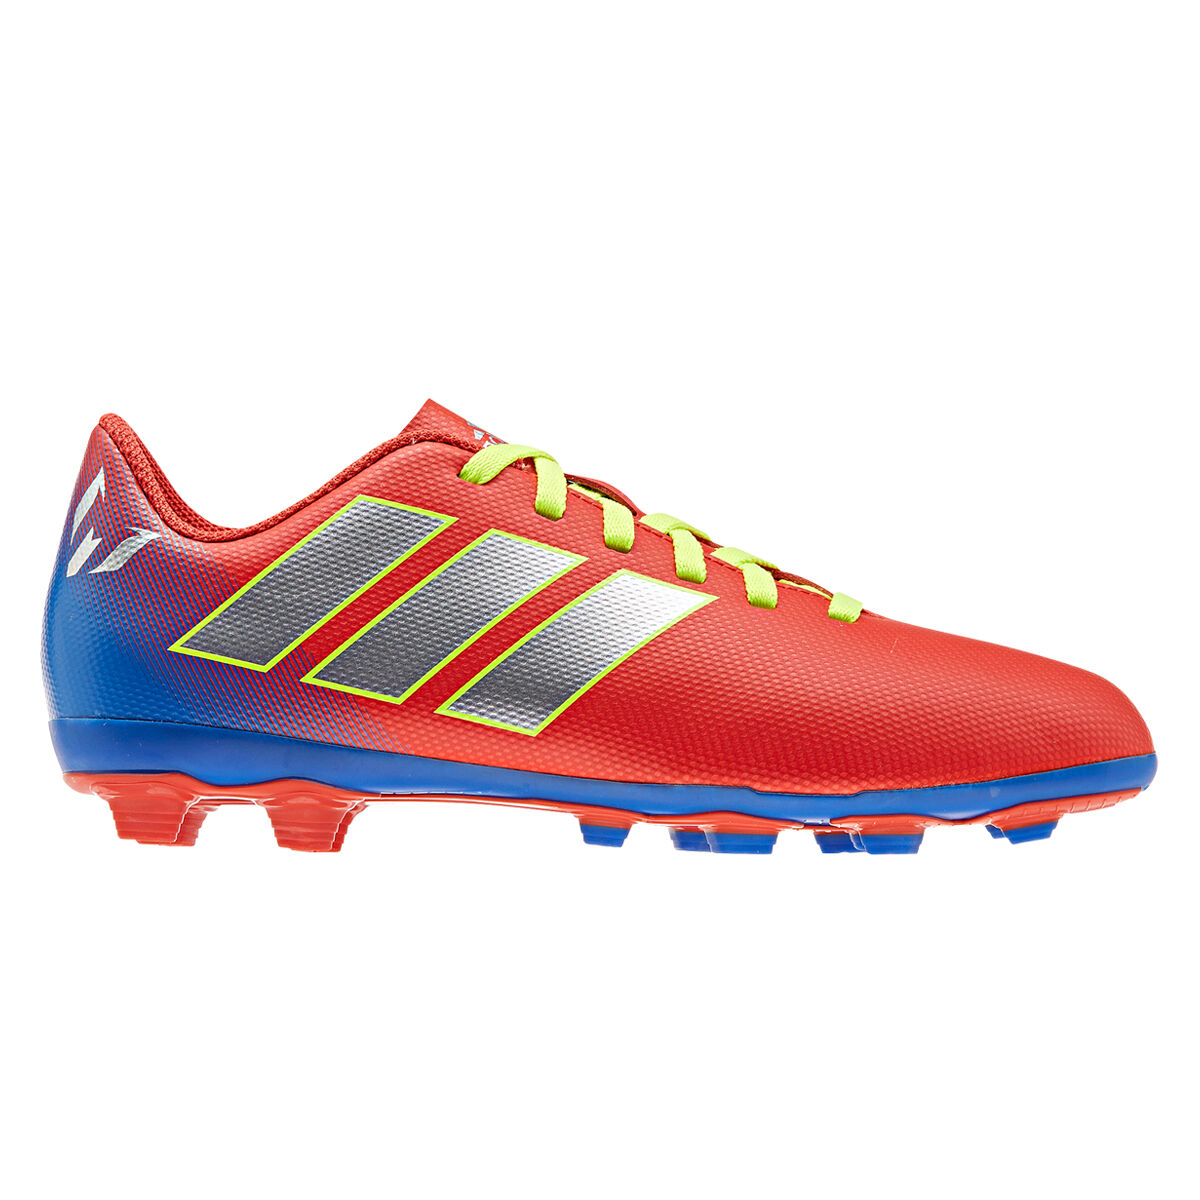 messi football shoes price